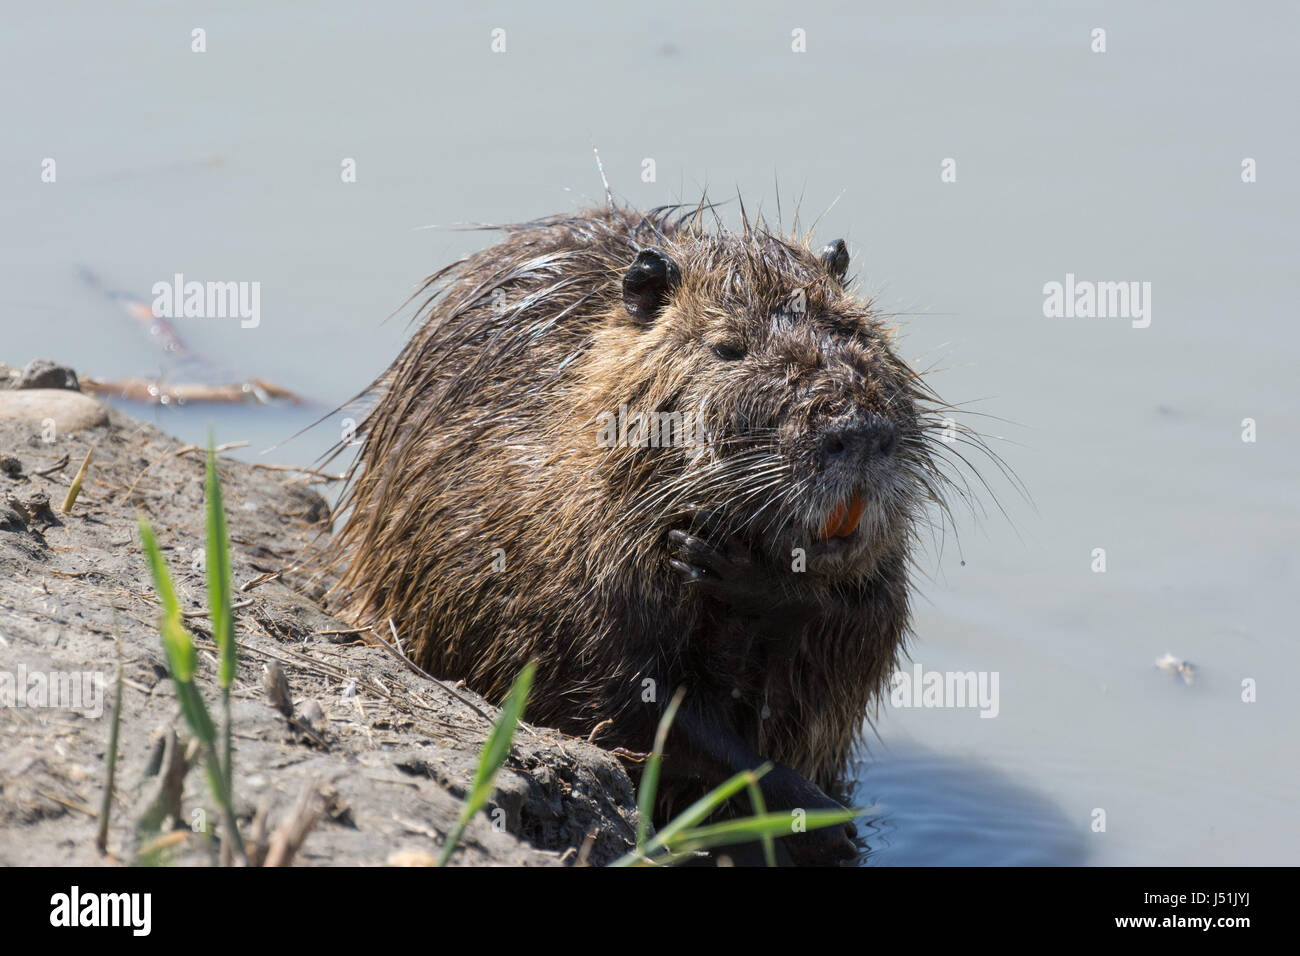 A Coypu, a large, aquatic rodent, sits in water at the edge of a muddy bank. Stock Photo